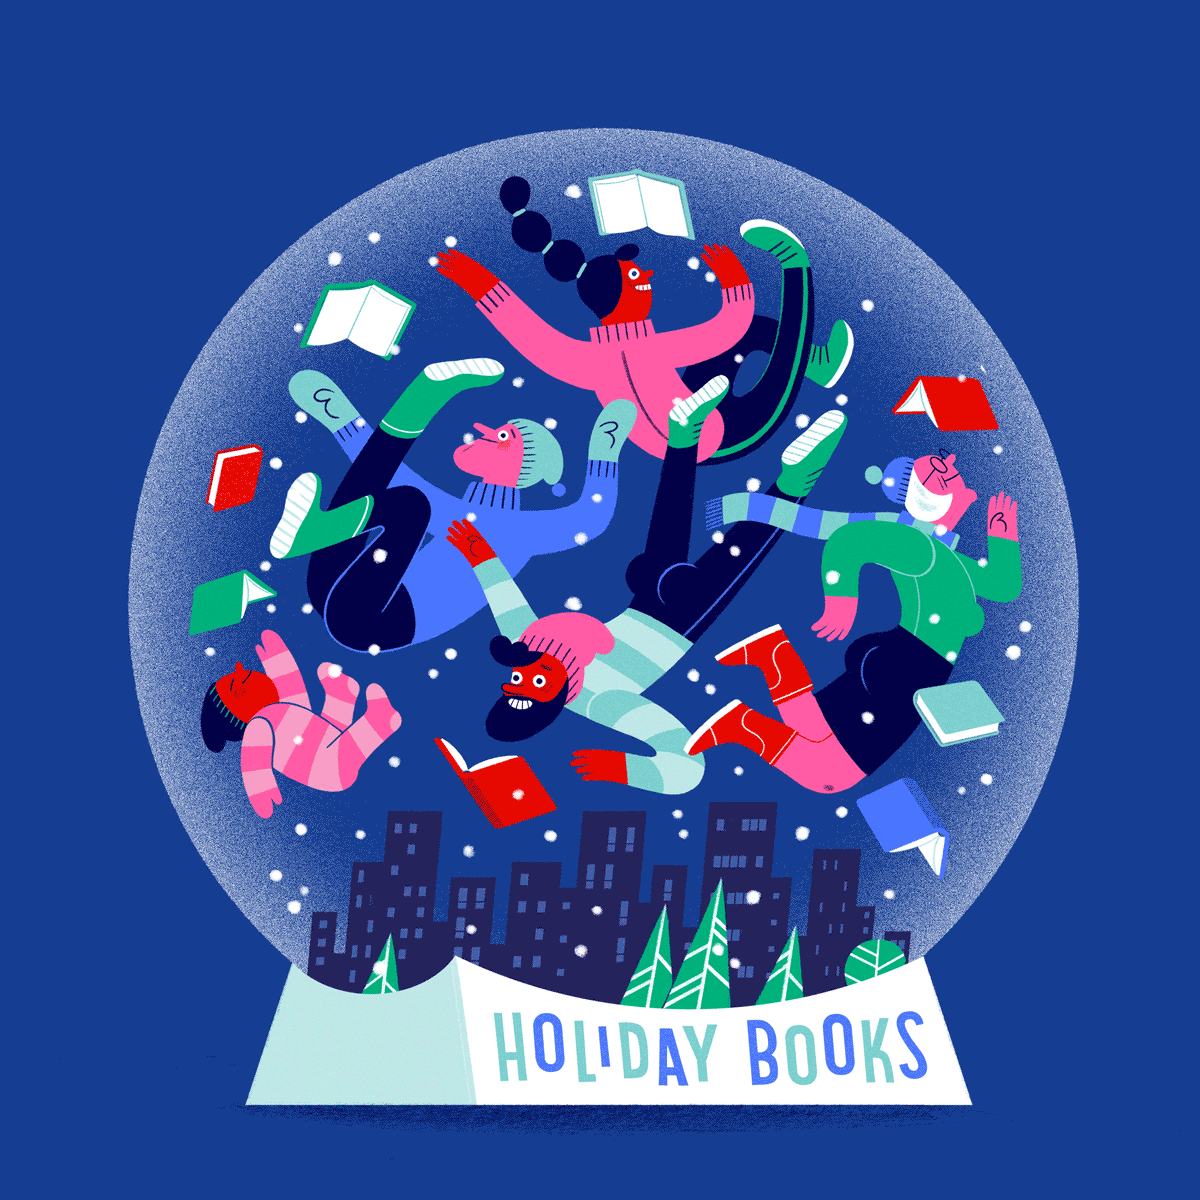 NYTimes_HolidayBooks2018_EstherAarts_cover_Animation_16frames_1200x1200